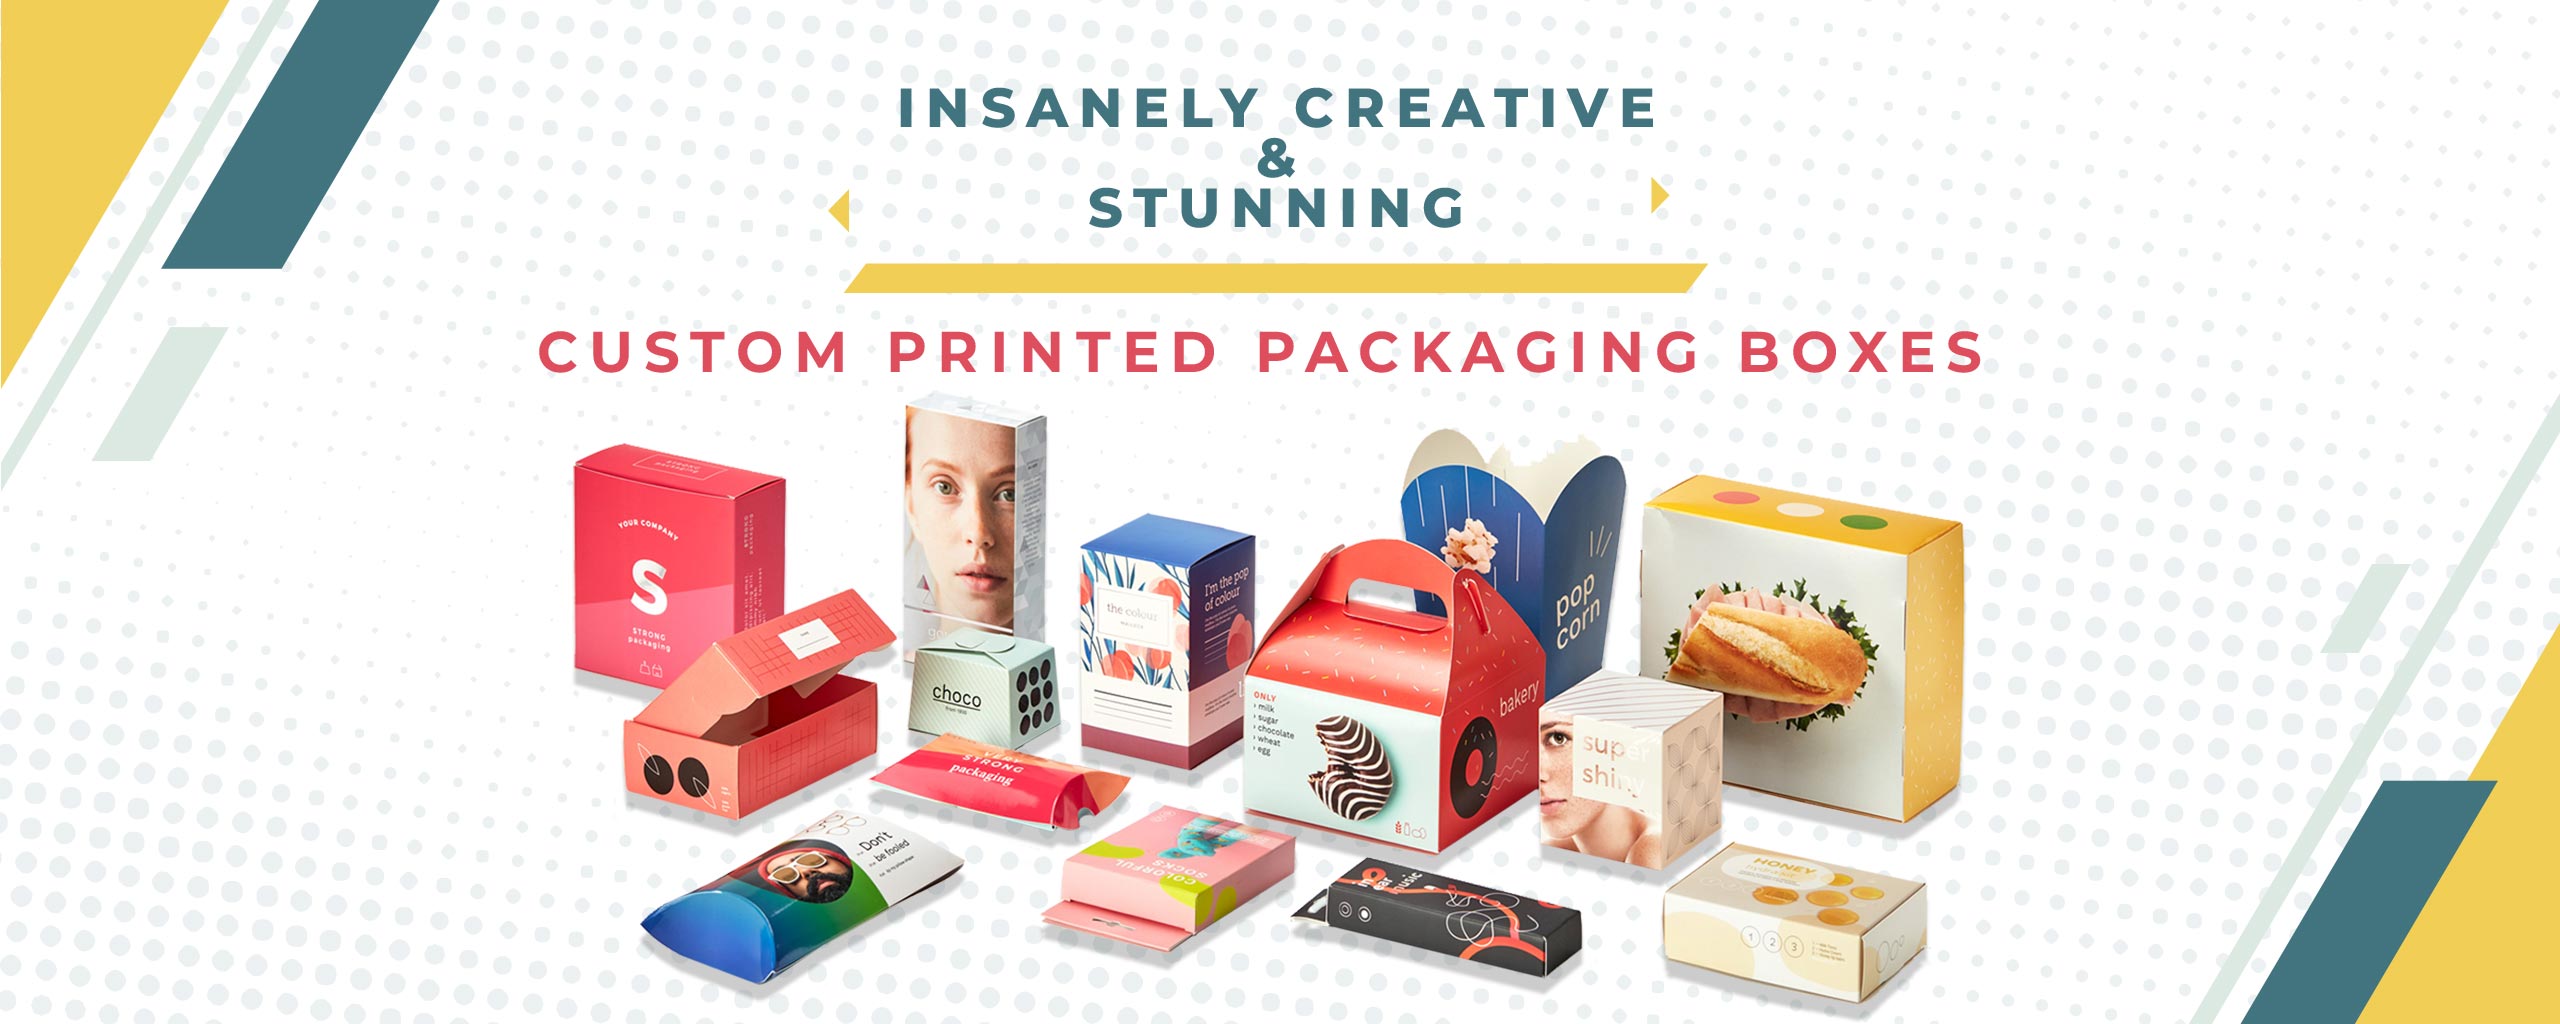 Insanely Creative & Stunning Custom Printed Packaging Boxes